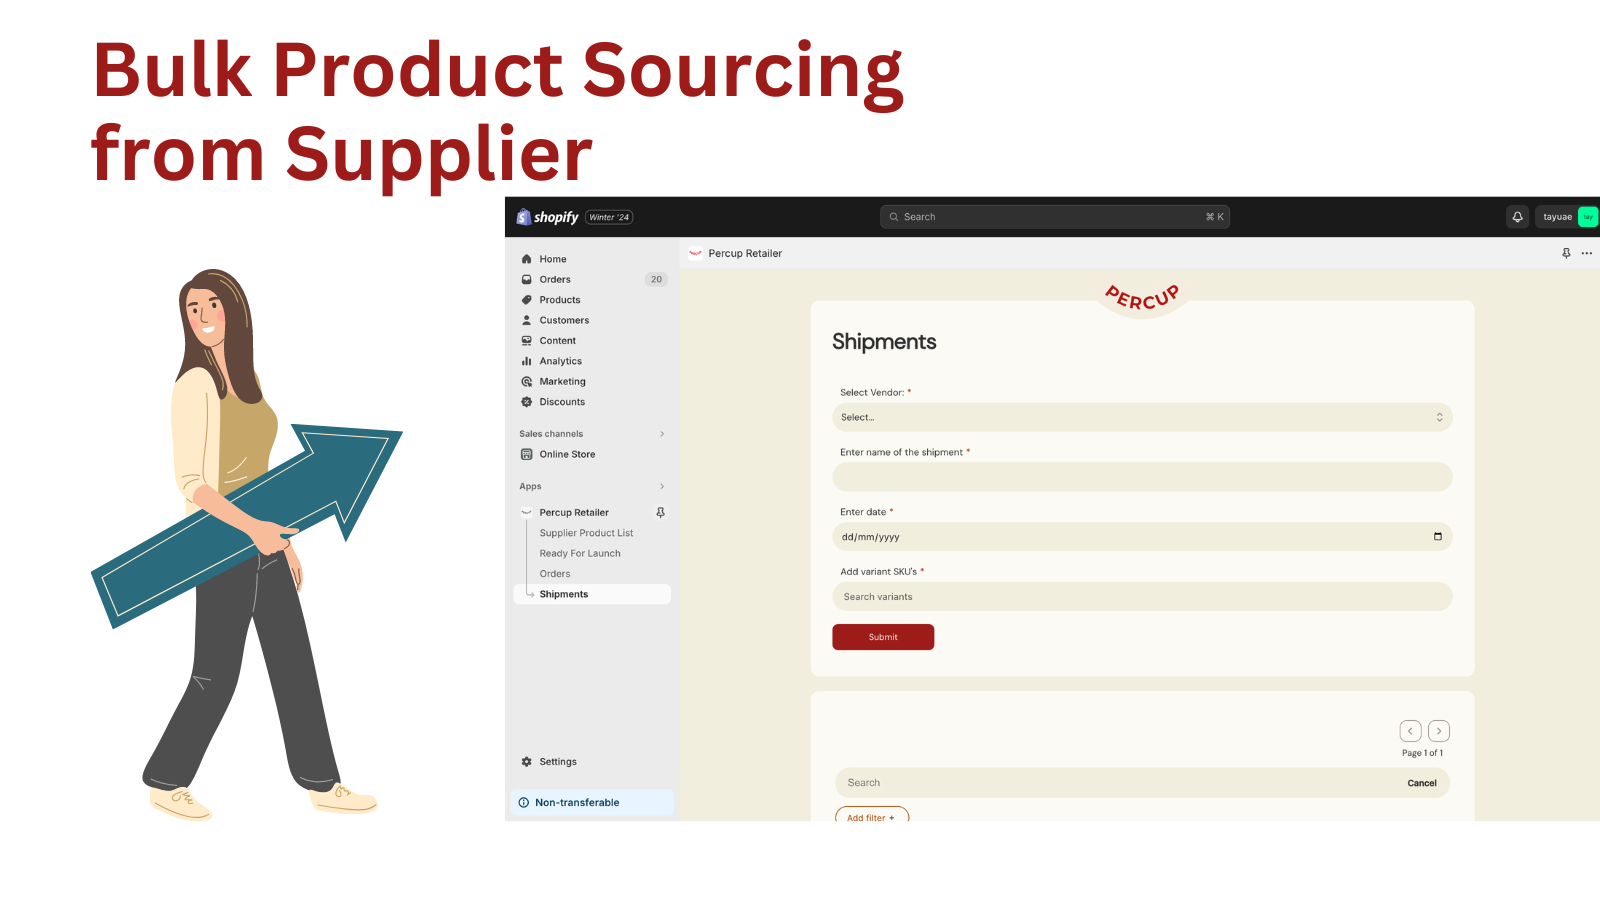 Bulk Product Sourcing from Supplier